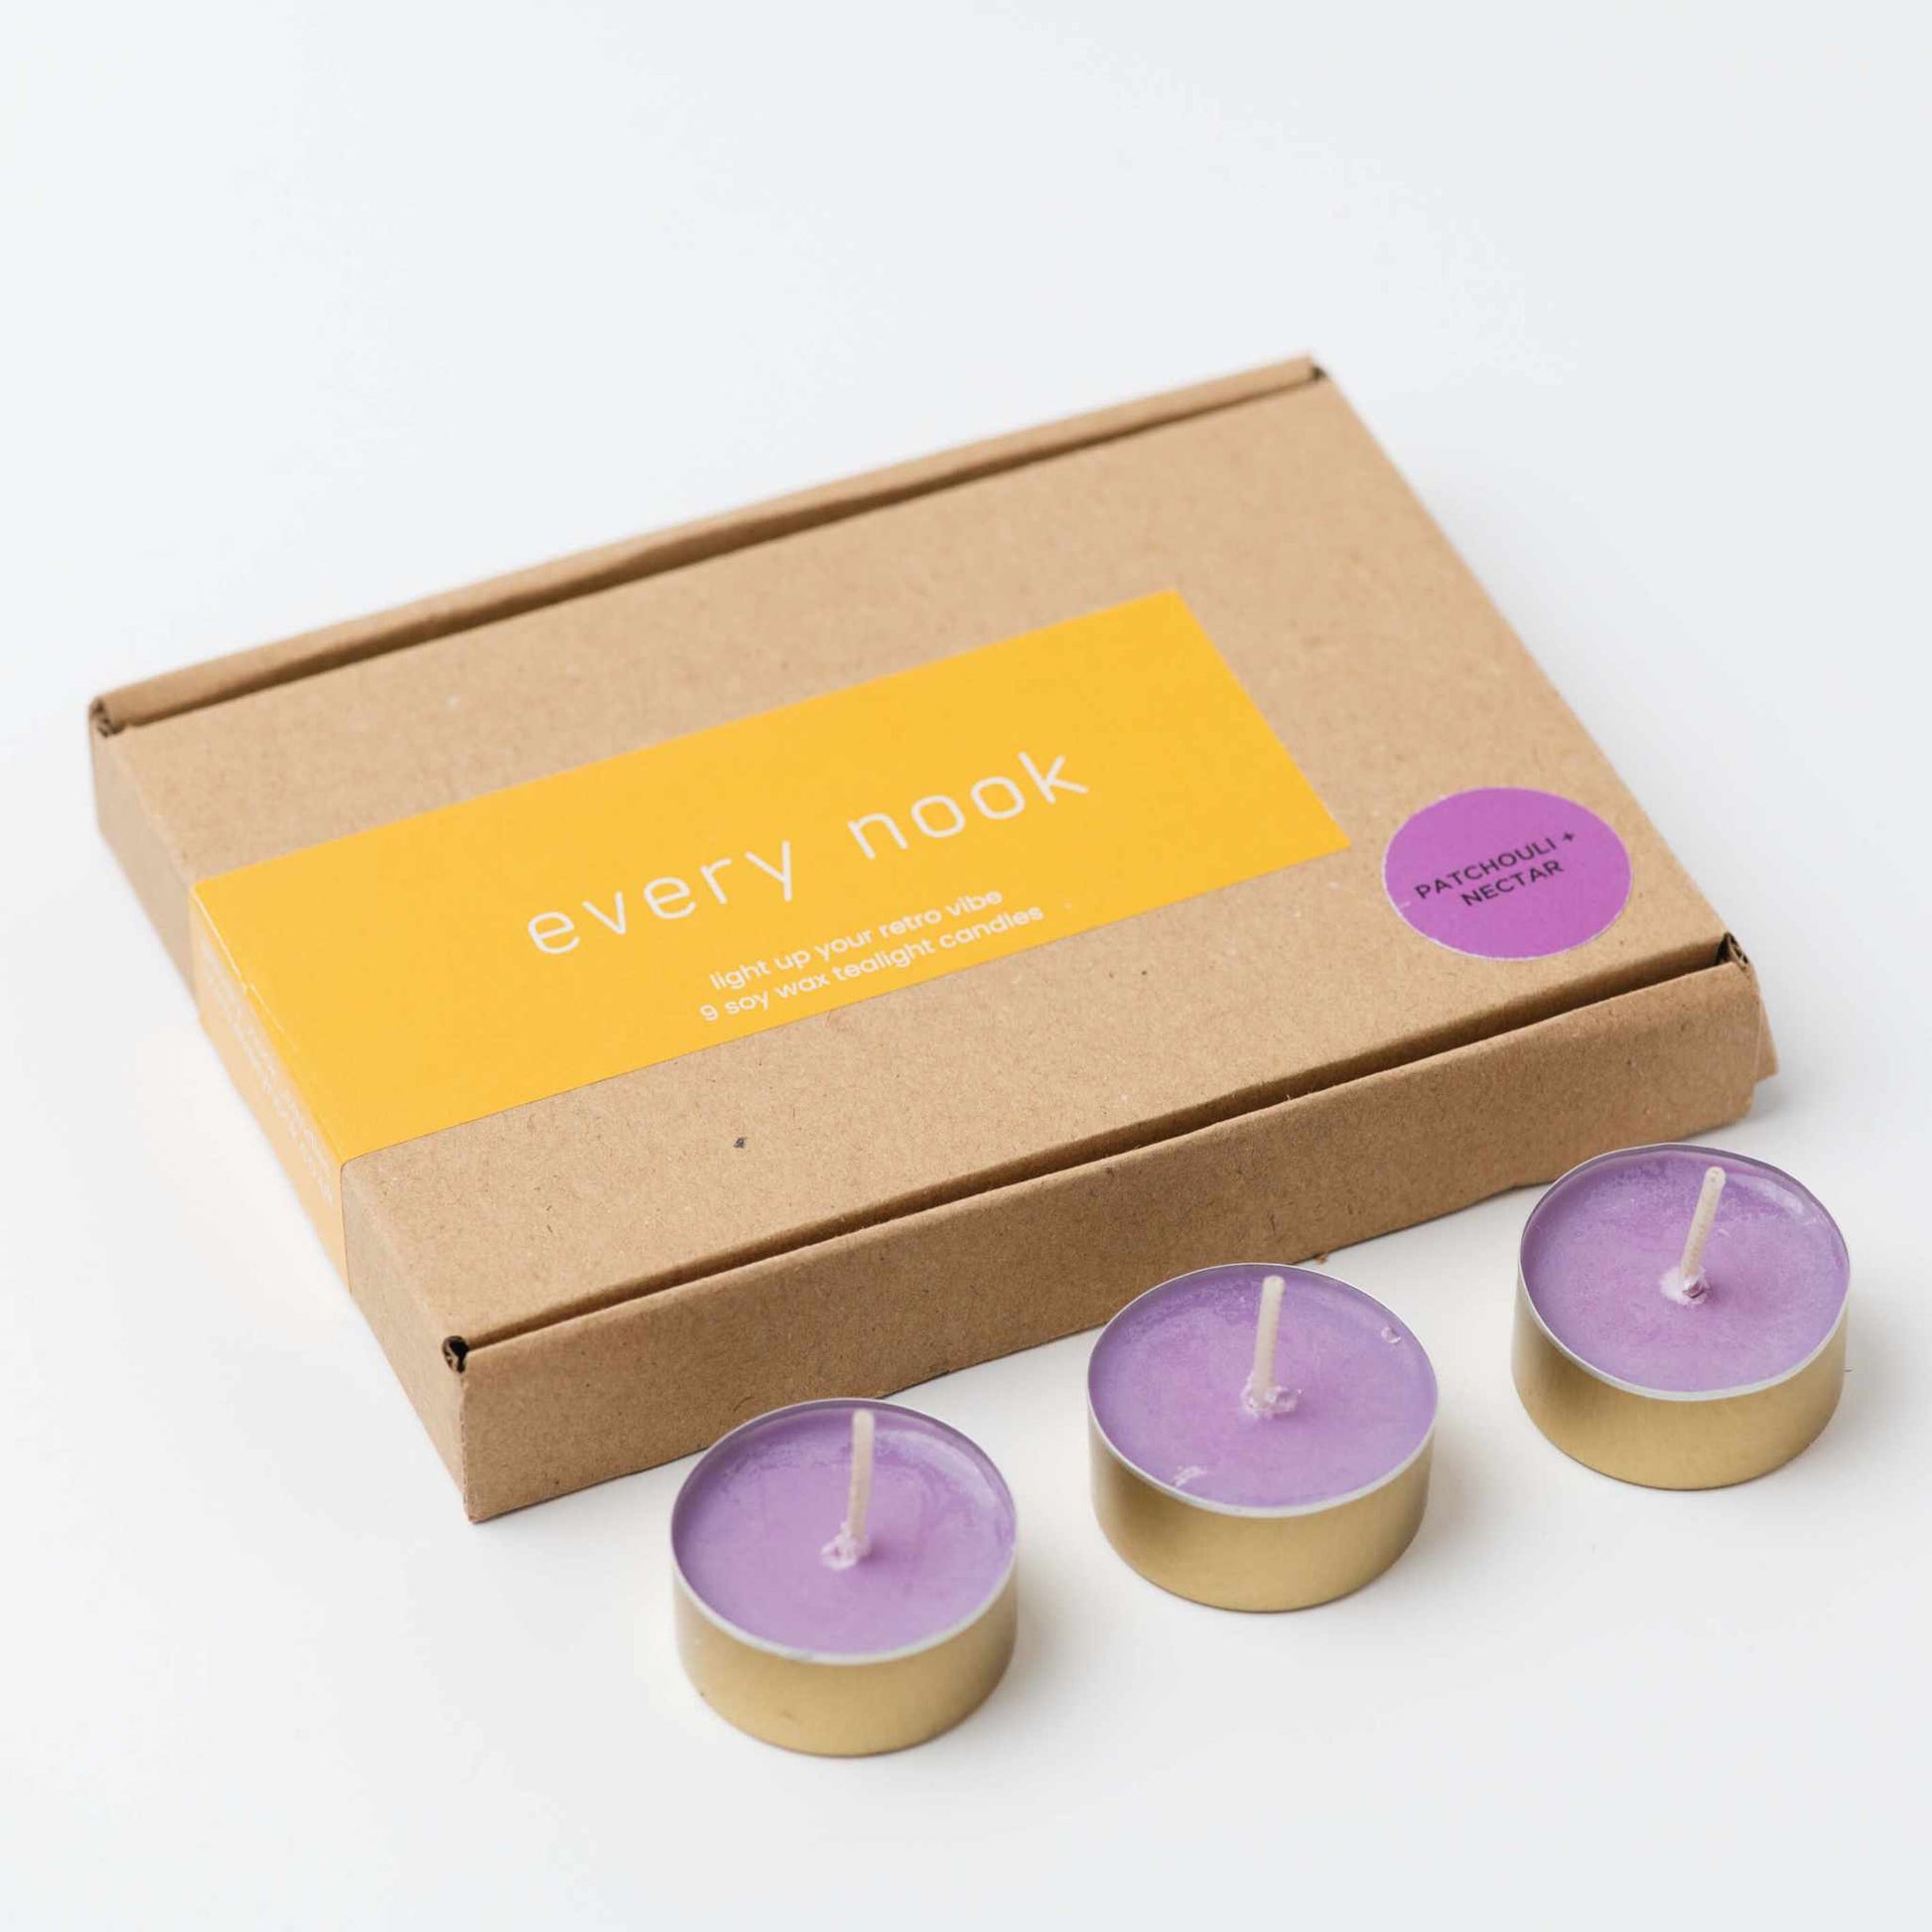 every nook scented tealights - Patchouli + Nectar scented tealights